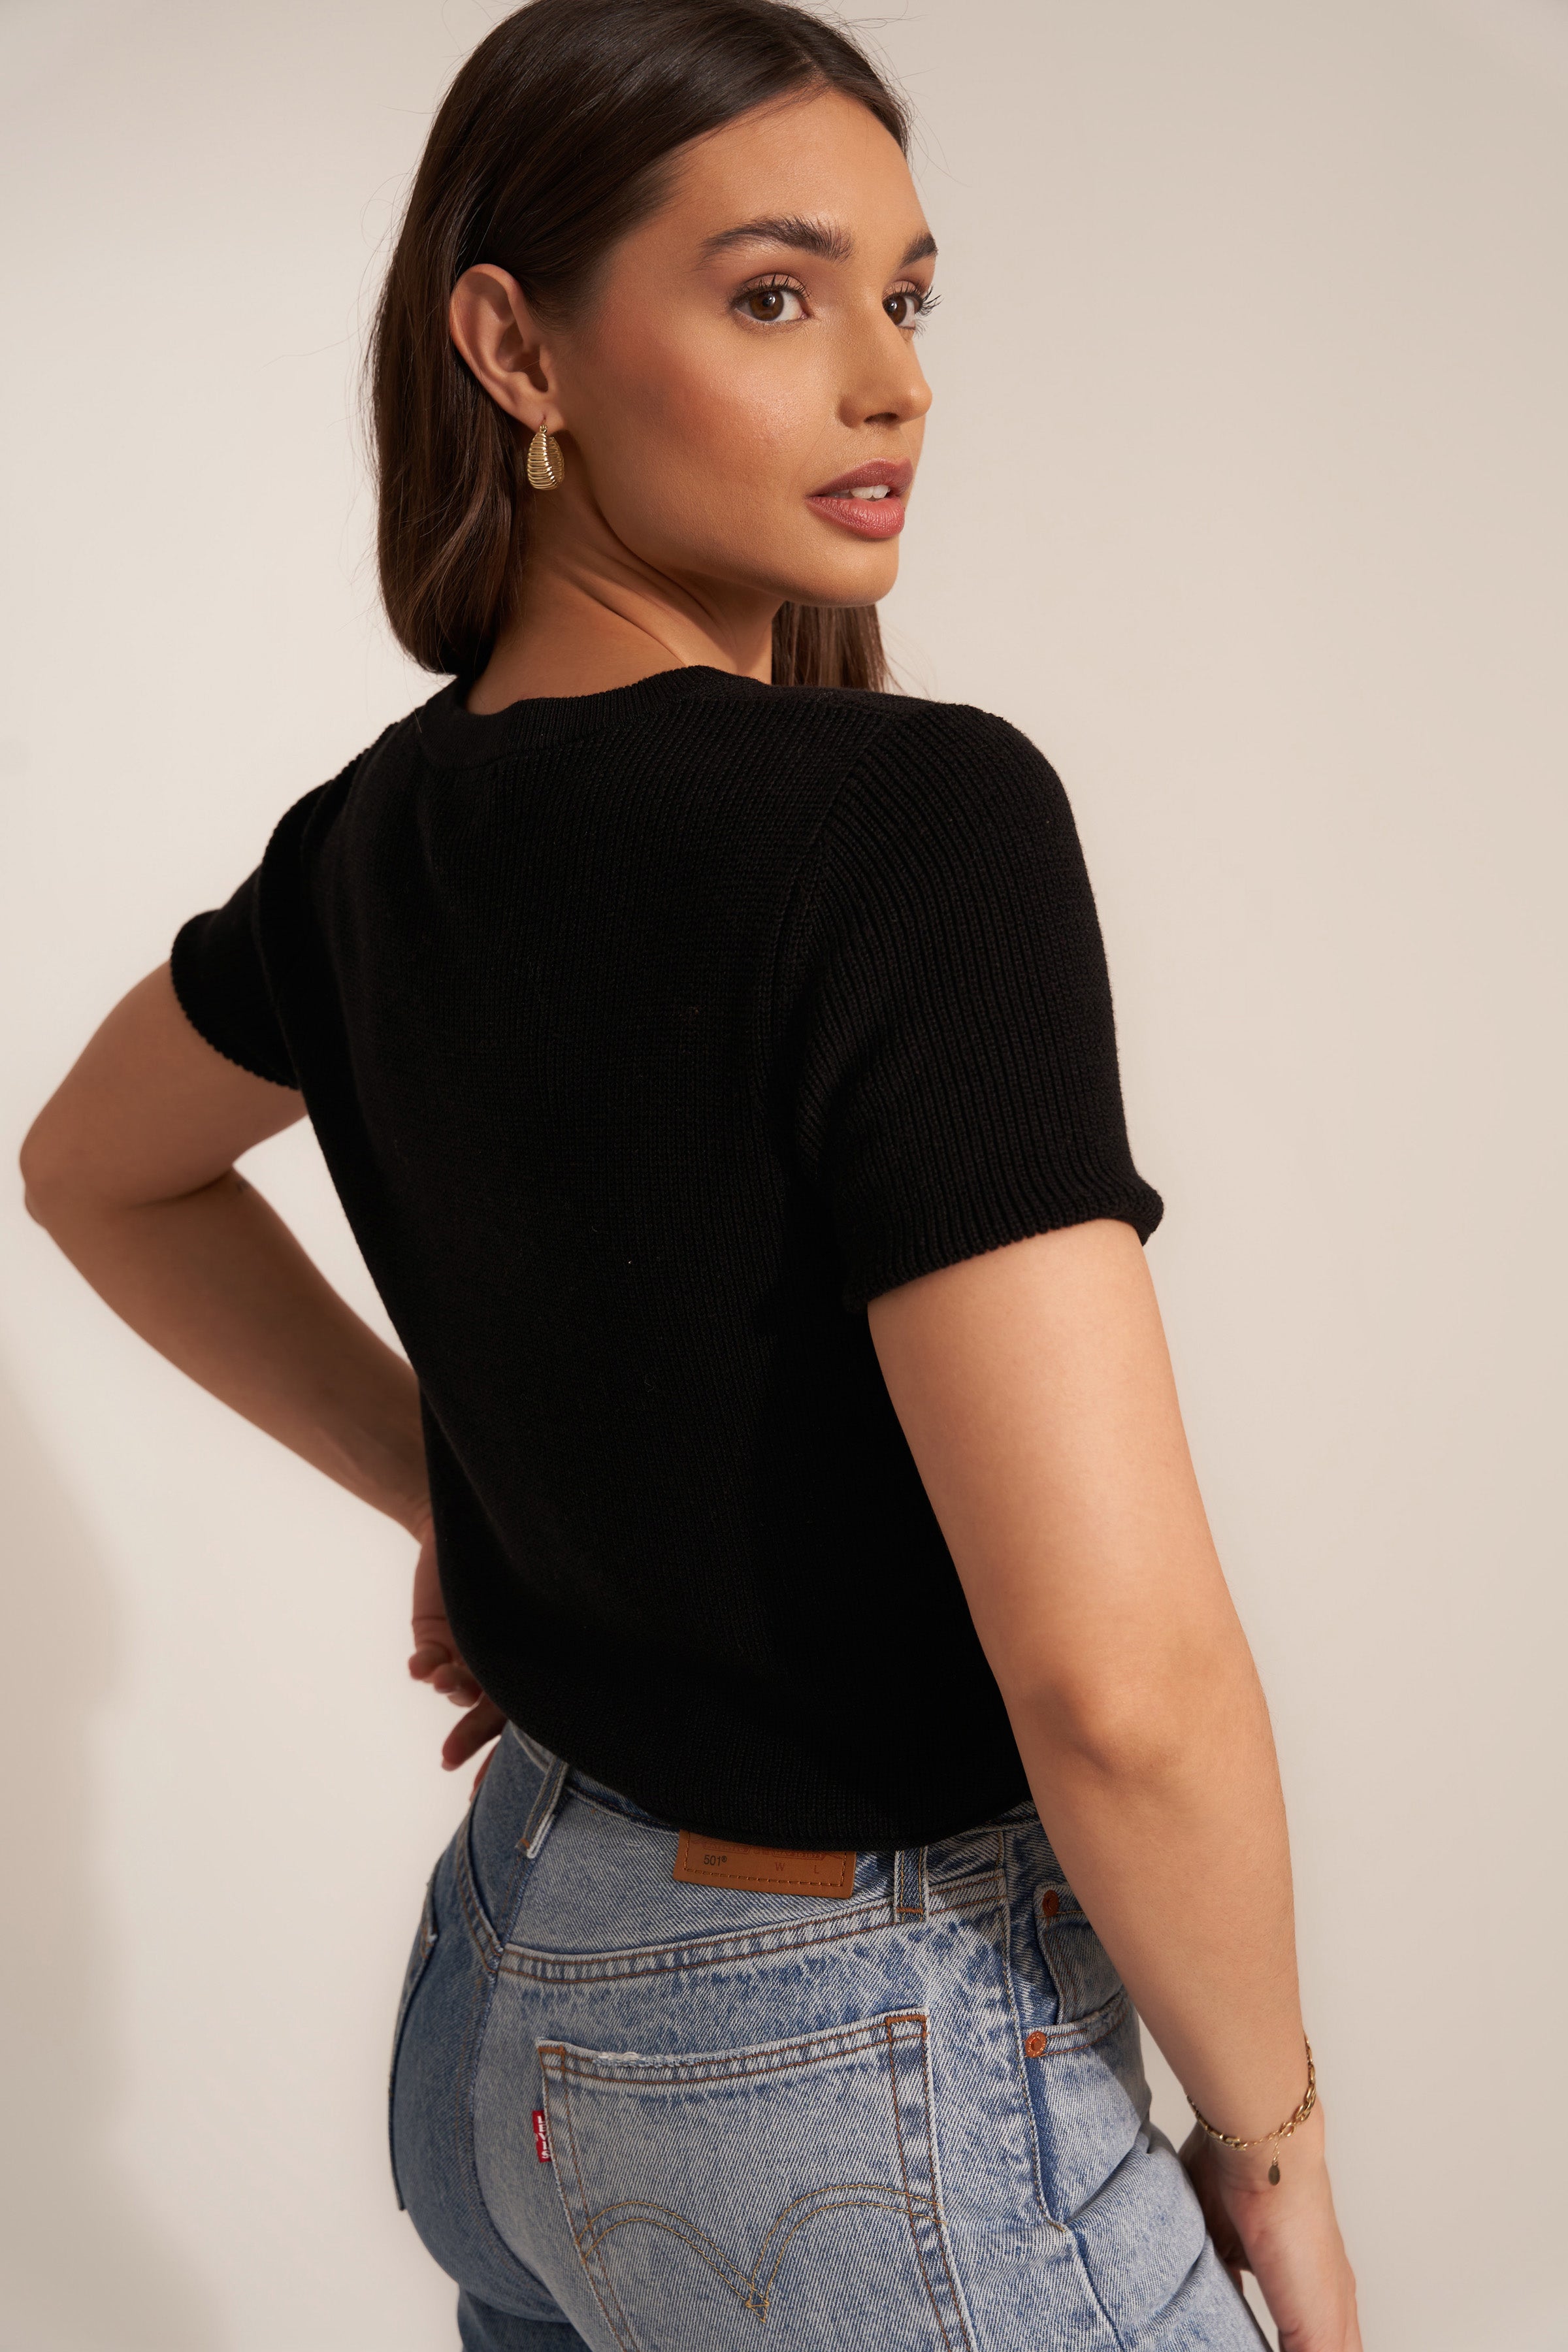 The Knit Tee in Black